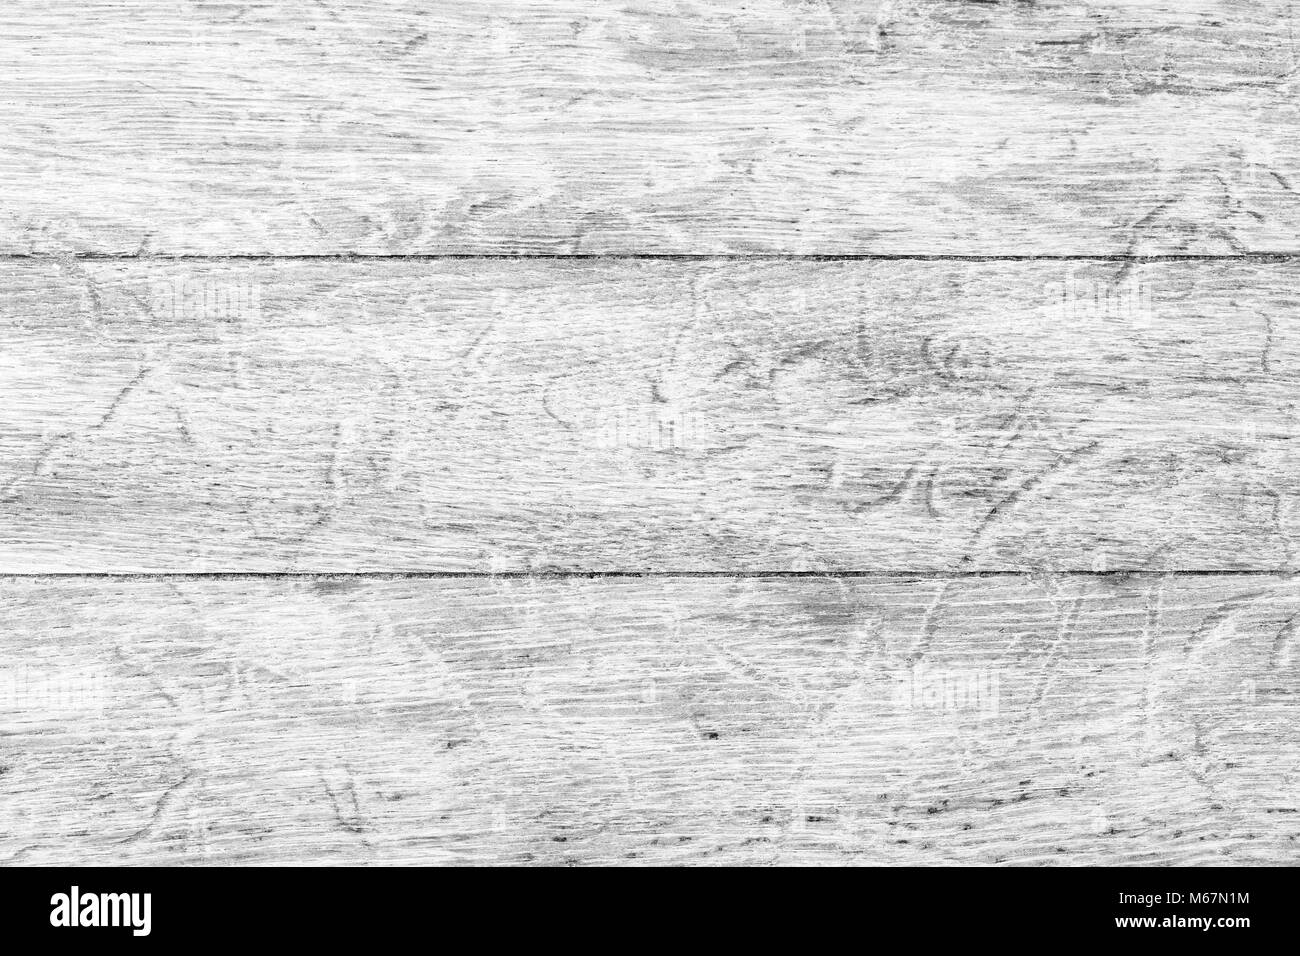 high resolution white wood backgrounds Stock Photo